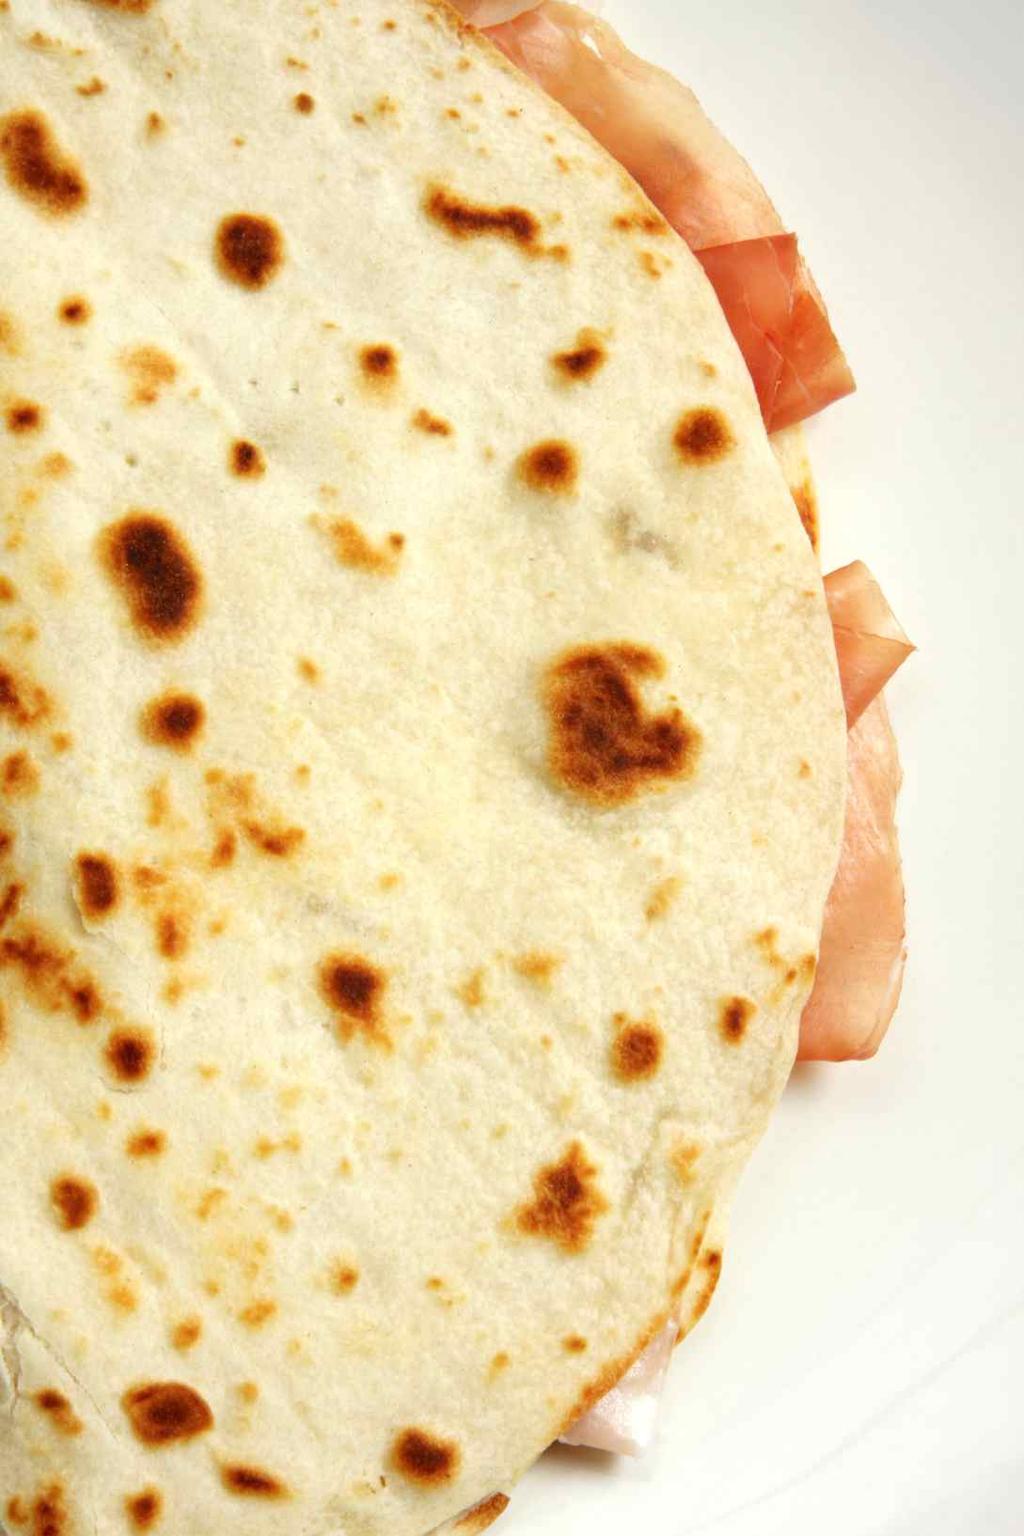 Get every day a different taste History of Piadina Piadina is a very ancient kind of bread. Well-known since ancient Roman time, it was a simple food coming from culinary tradition of poor people.